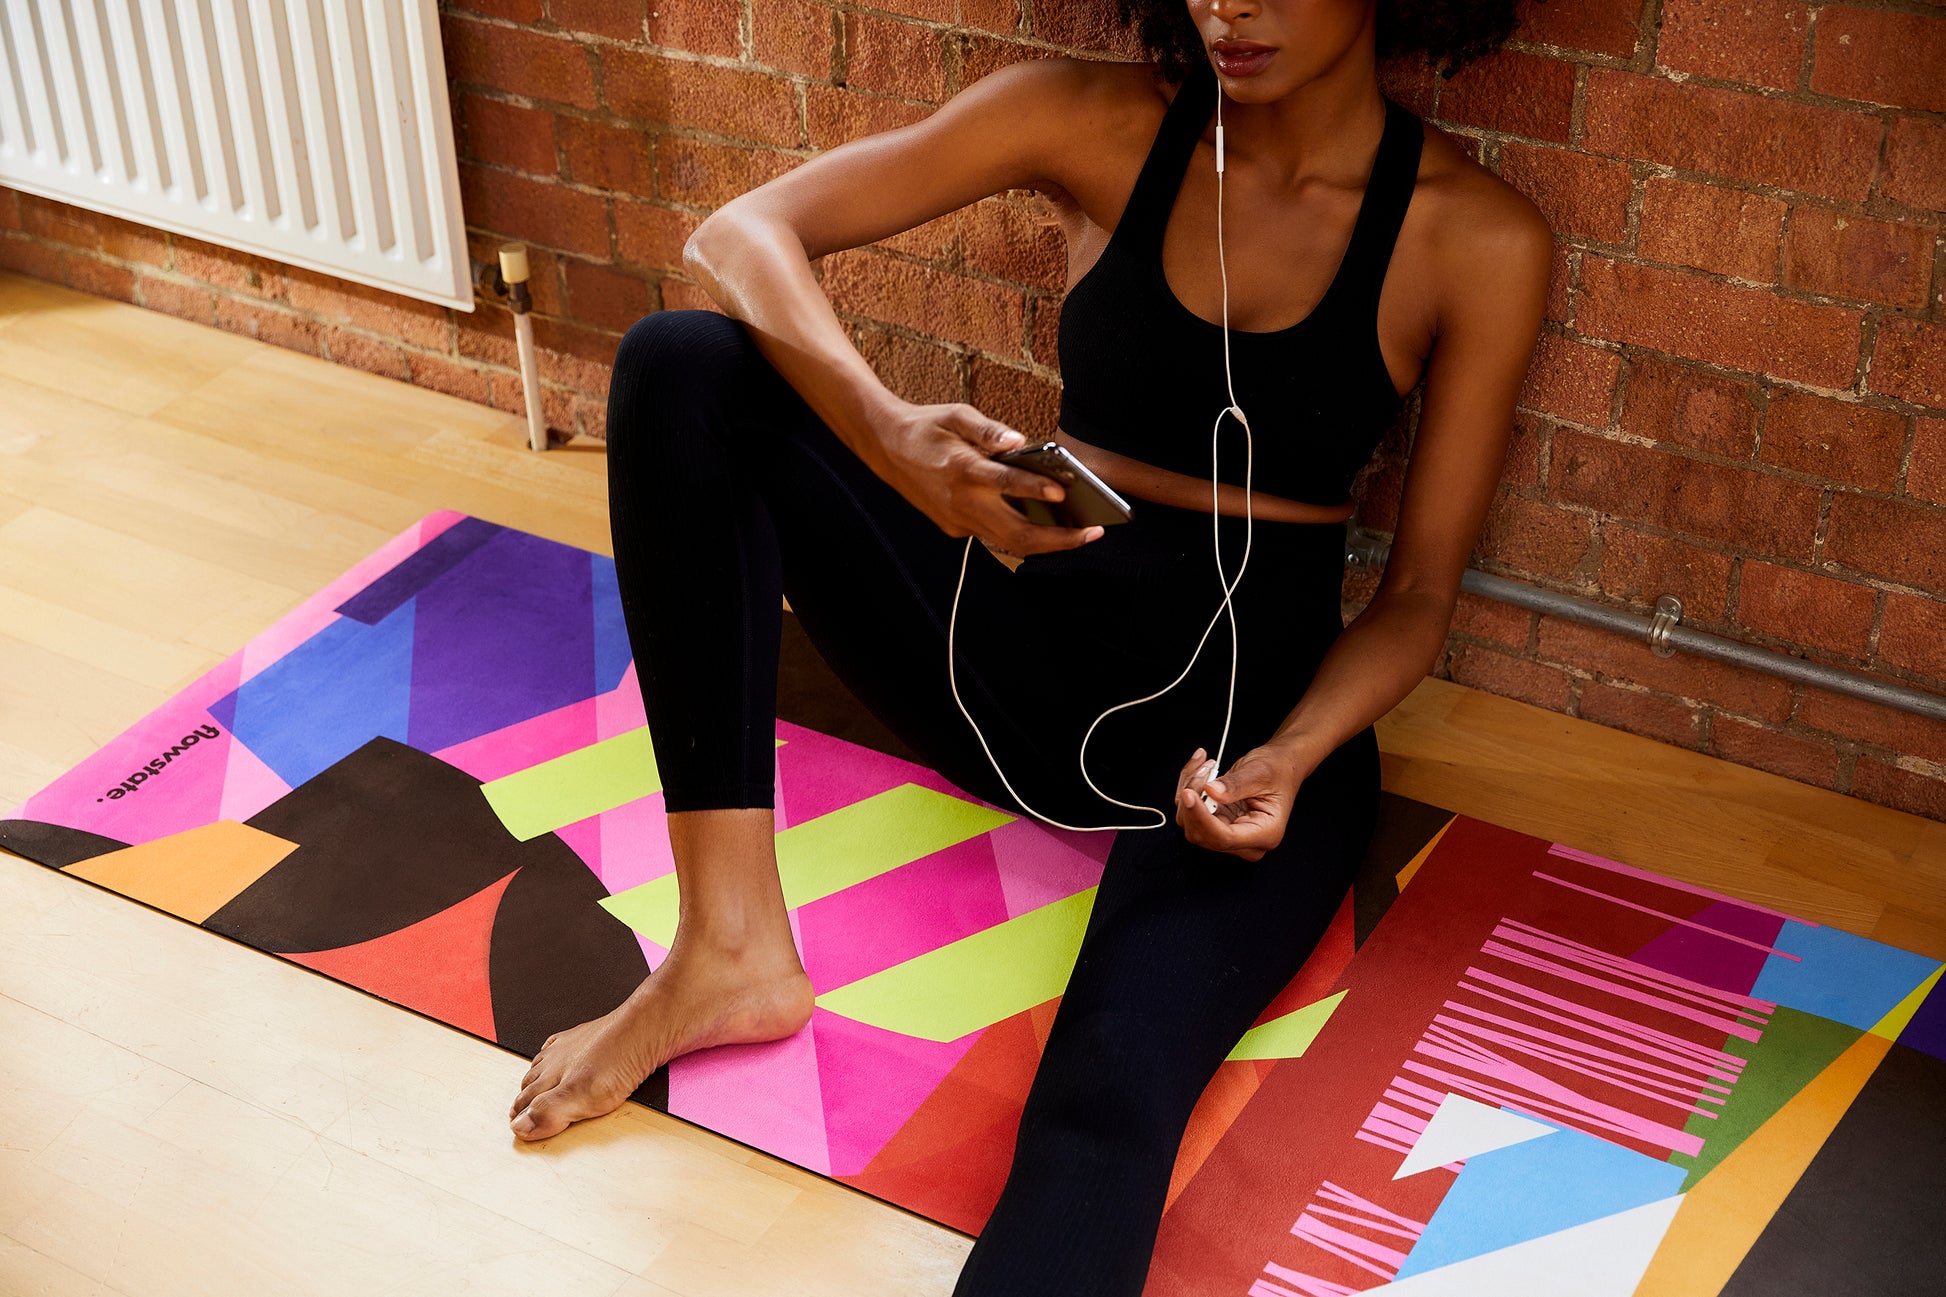 Someone sitting looking at her phone on the Equilibrium 3 Flowstate Yoga Mat 